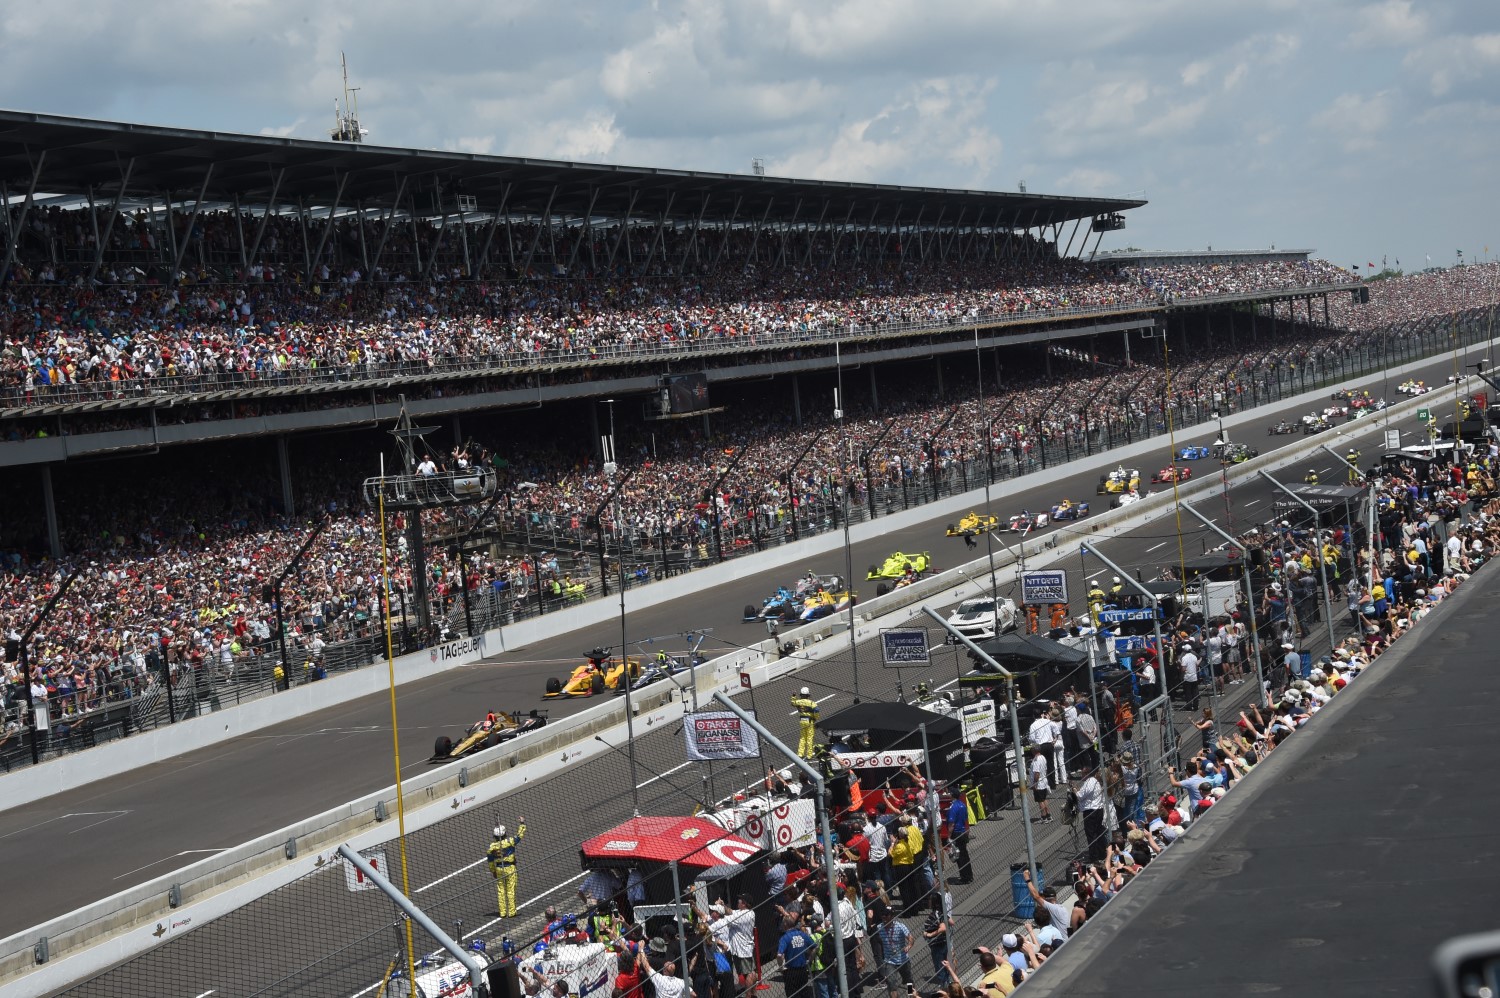 A record 350,000 attended last year's Indy 500